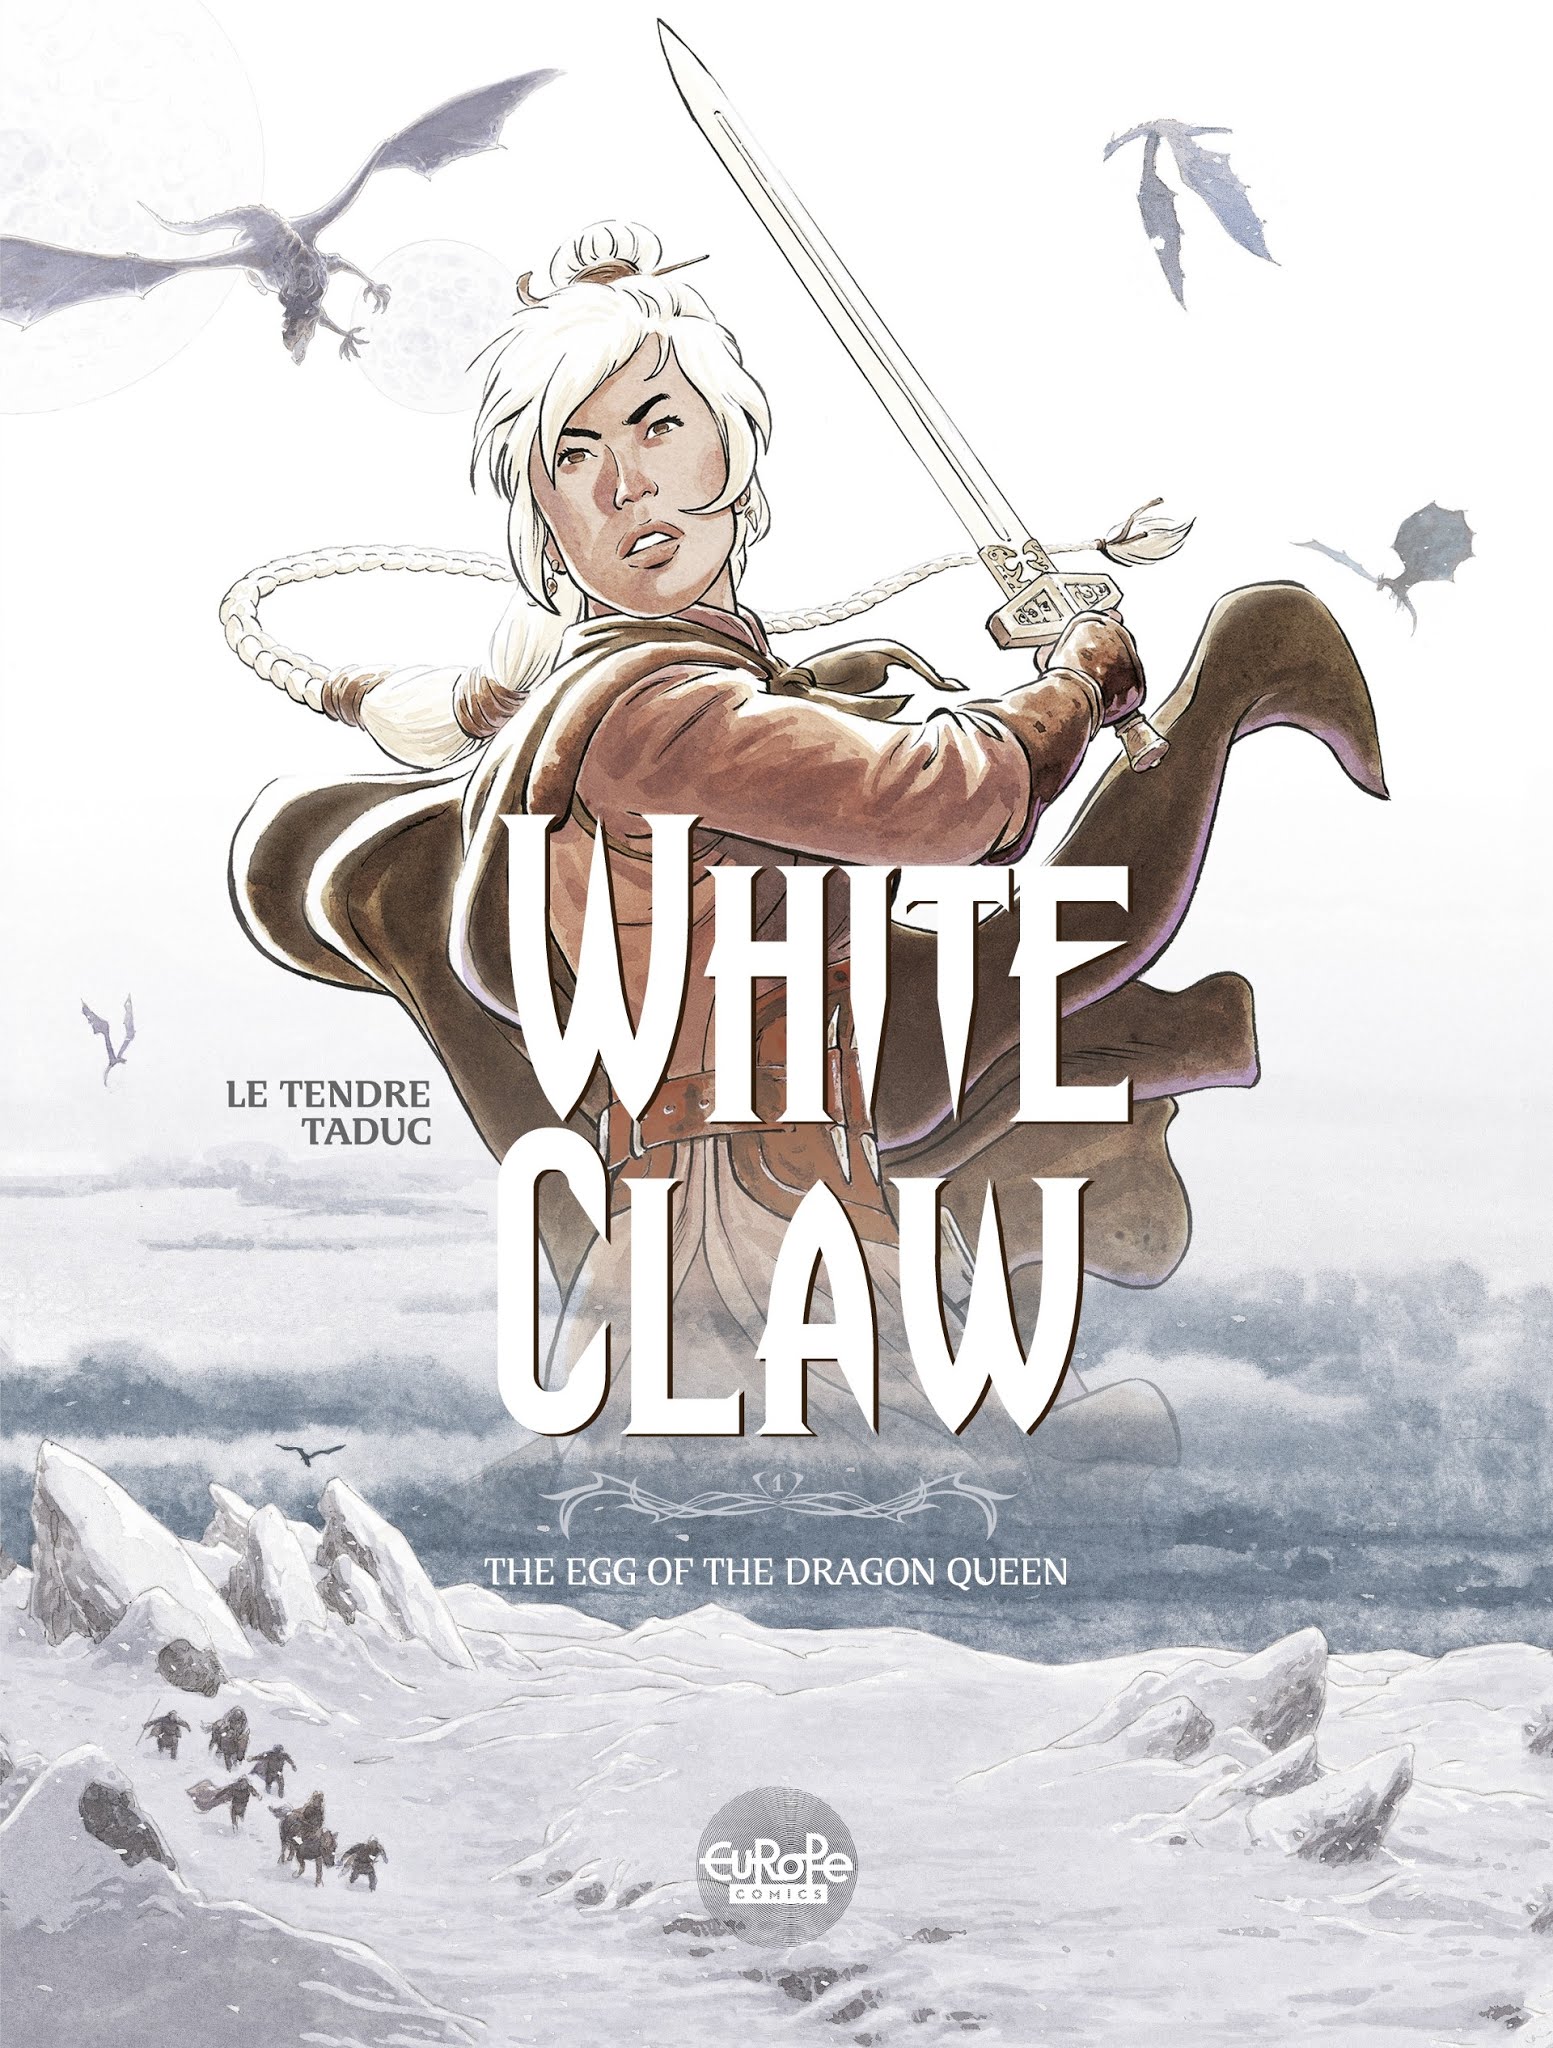 Read online White Claw comic -  Issue #1 - 1